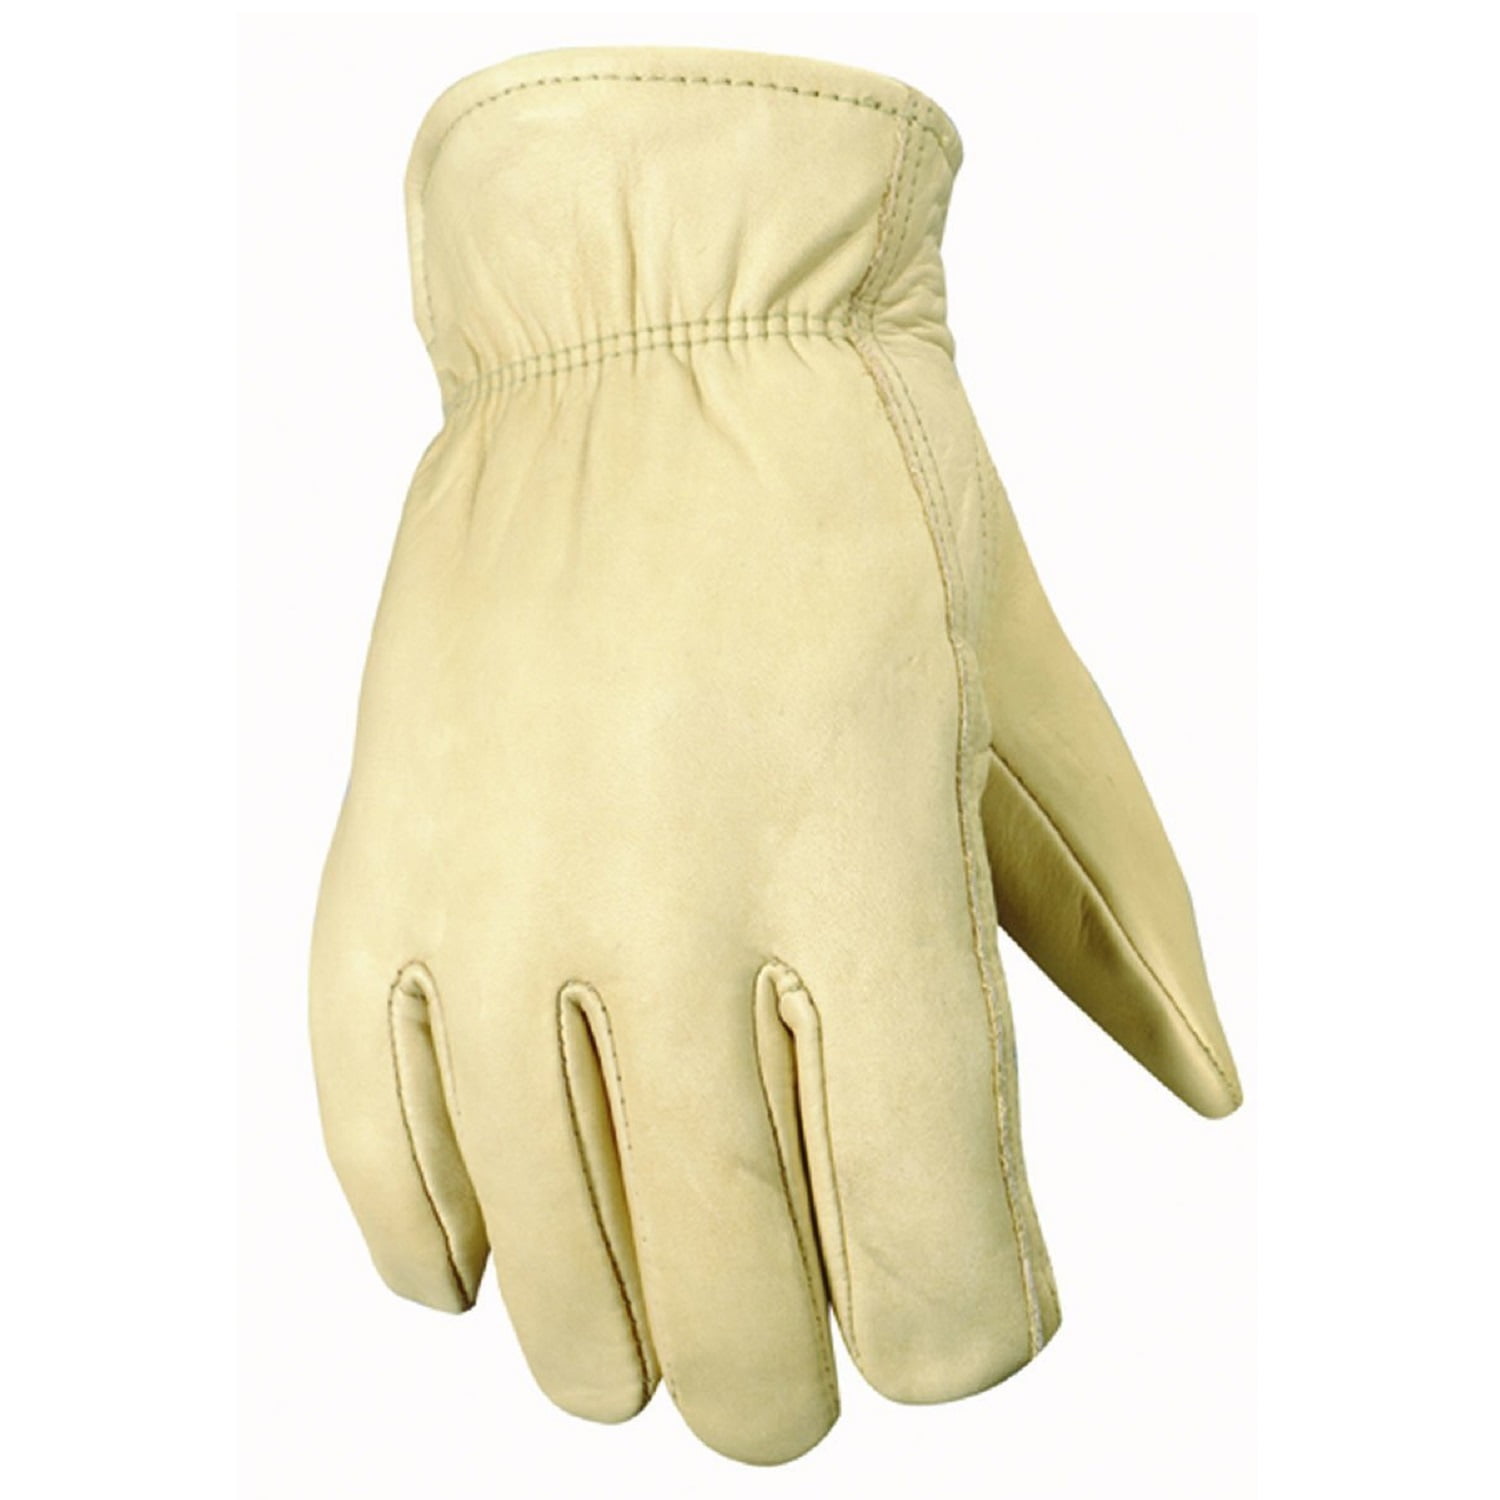 Wells Lamont Men's Leather Work Gloves 100% Cowhide Leather